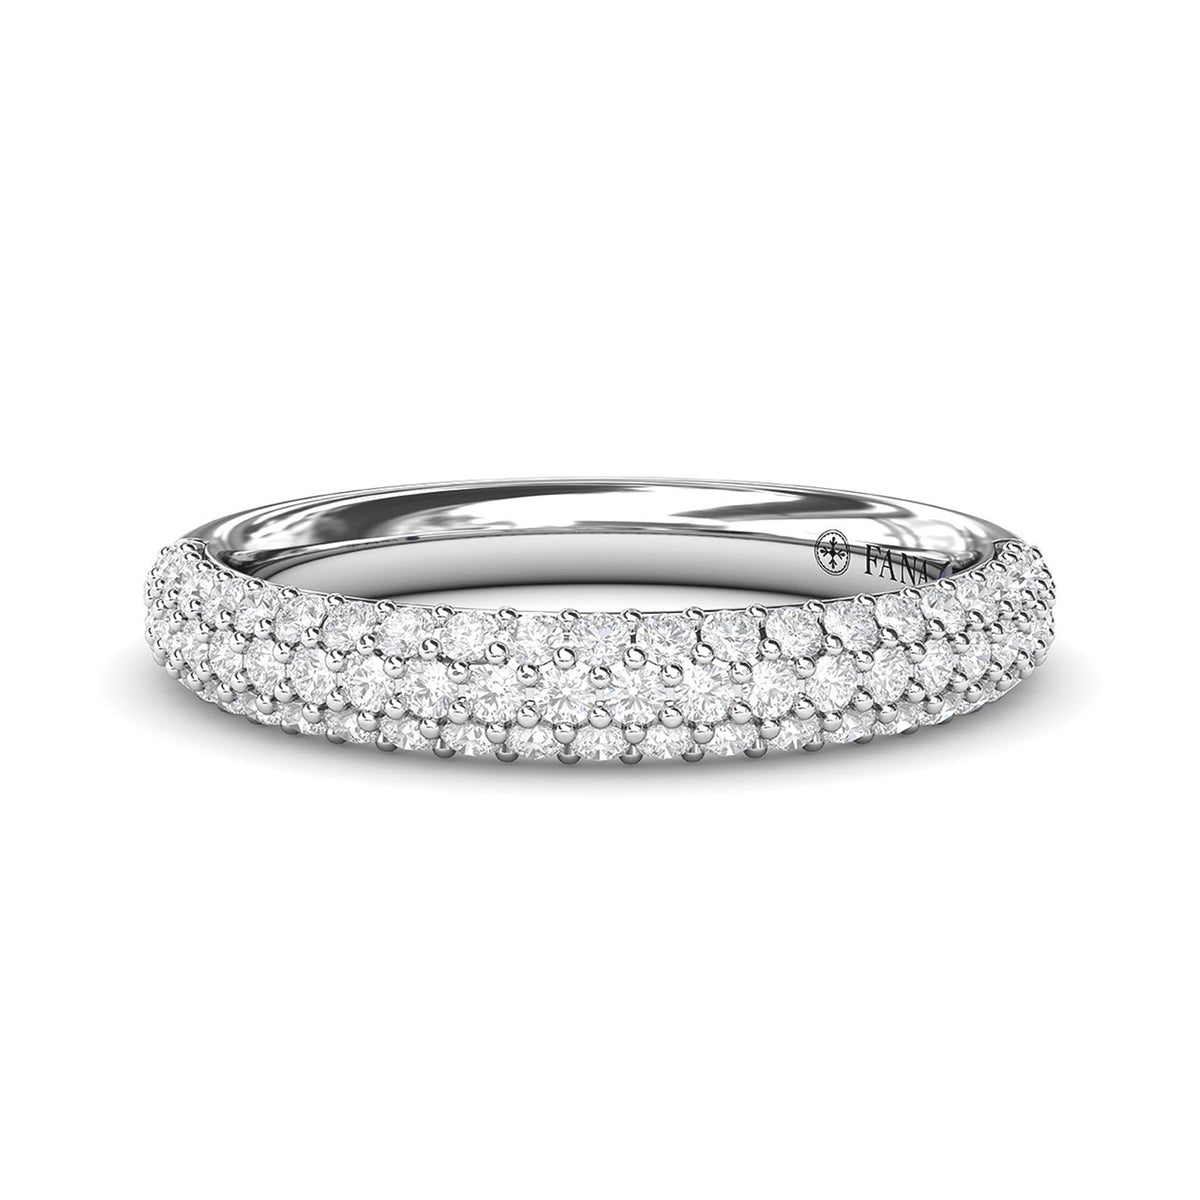 14Kt White Gold Stackable Wedding Ring With 0.58cttw Natural Diamonds